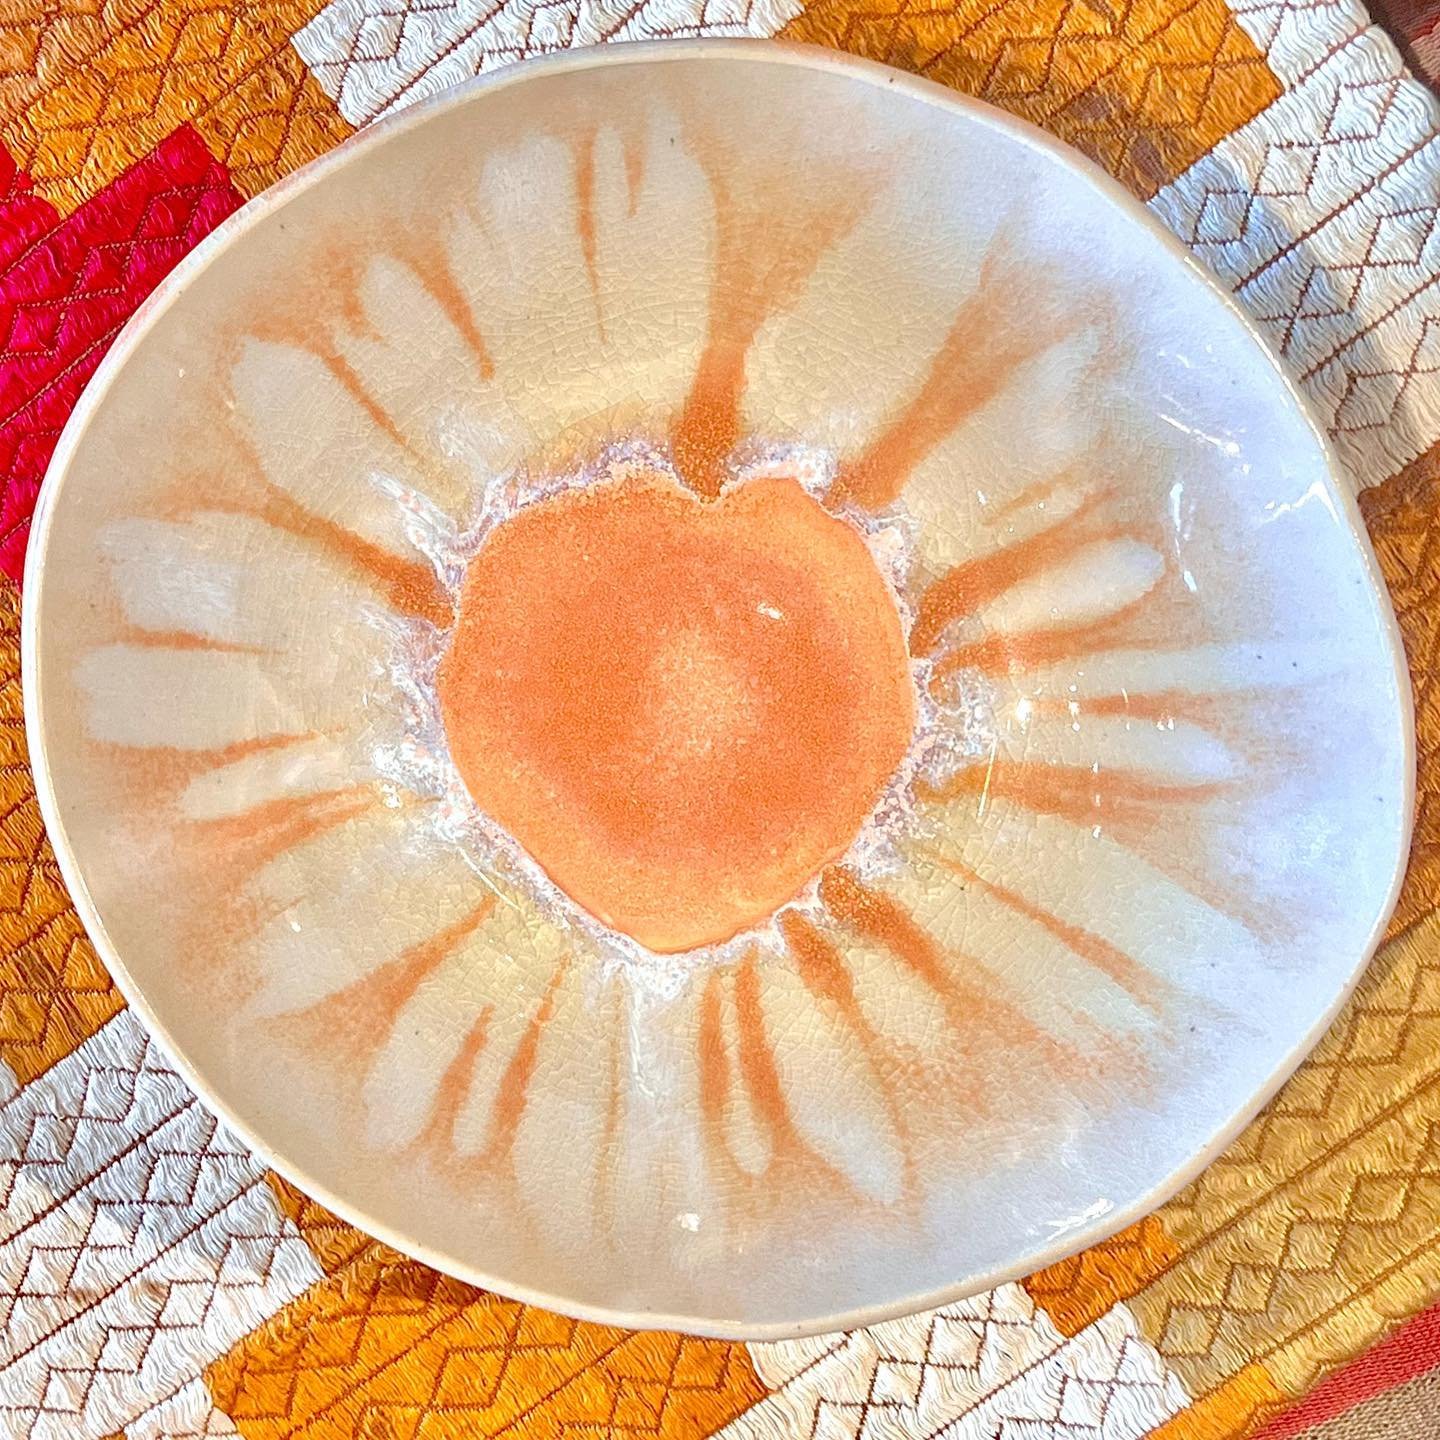 🧡 serving bowl~
@sukhmanidesign 
photo by @jadudesigns 

:
:
:
:
#bowl #servingbowl #heart #ceramics #homedecor #homesweethome #table #tablesetting #jodiefranco #clay